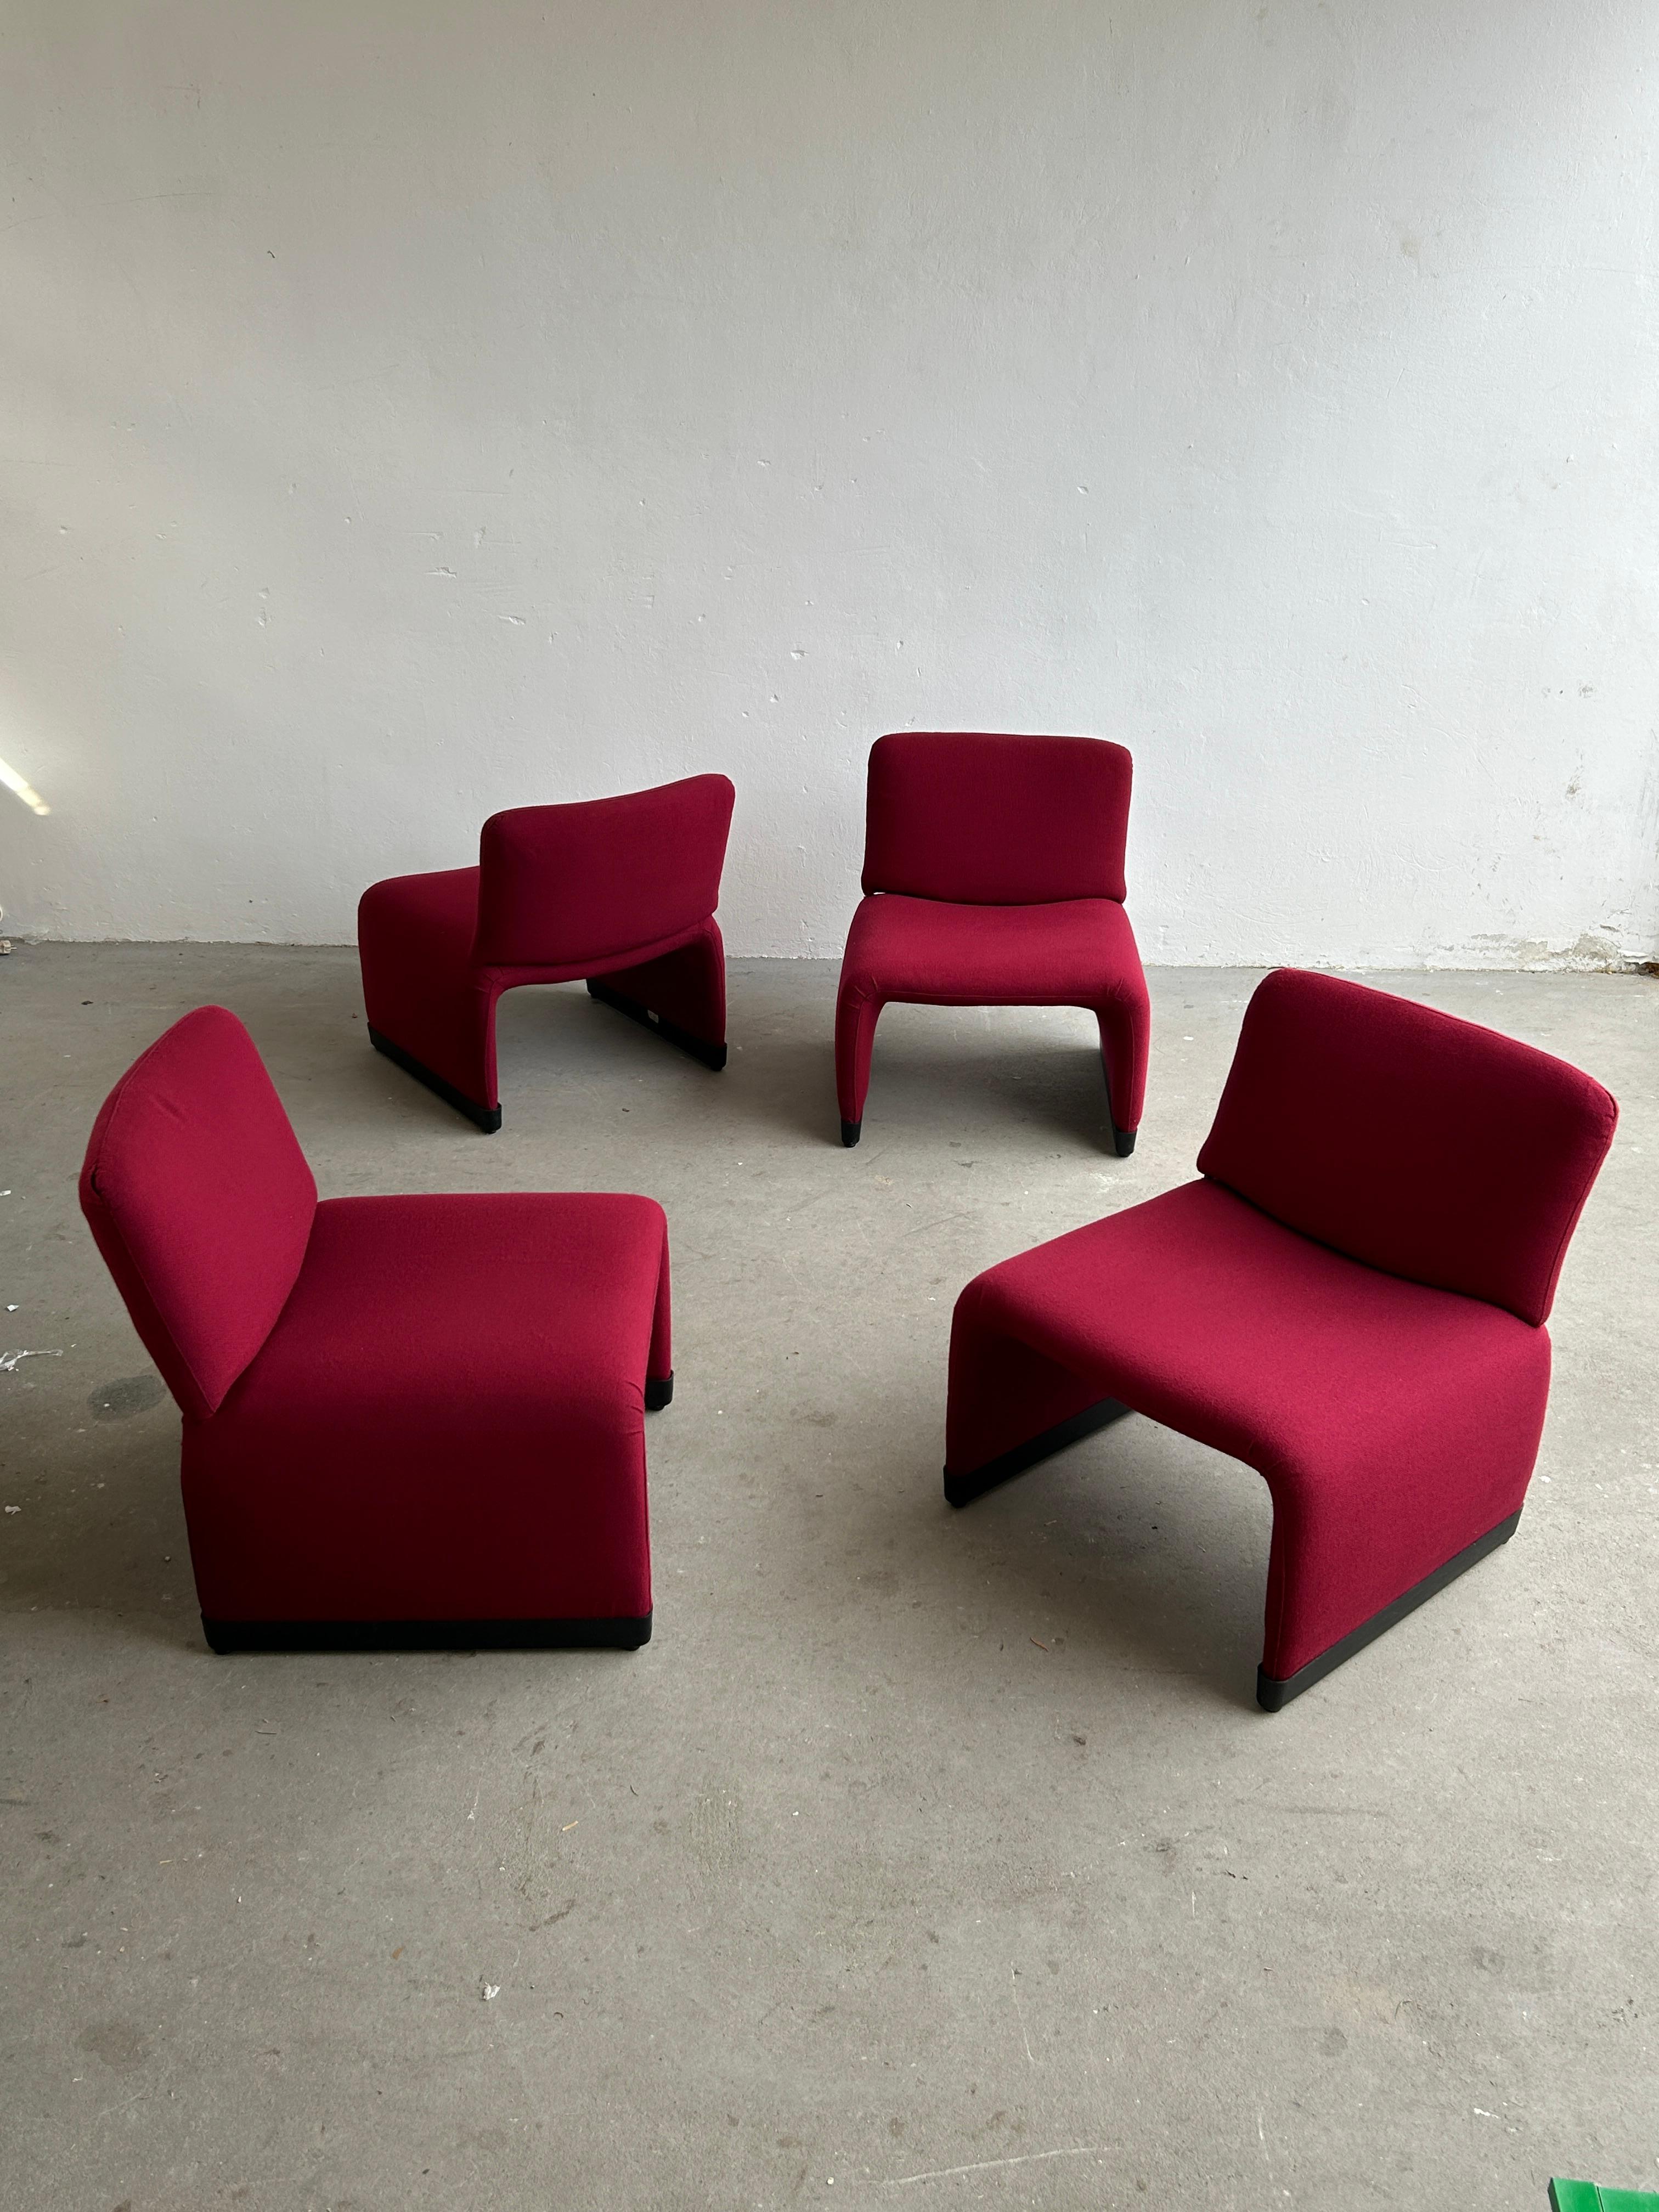 Set of four eye-catching 1970s Italian vintage lounge chairs, once a part of an Italian local bank office inventory.
The back of the chair is detachable as shown in the photographs.

Exceptionally well preserved with minimal signs of age, as